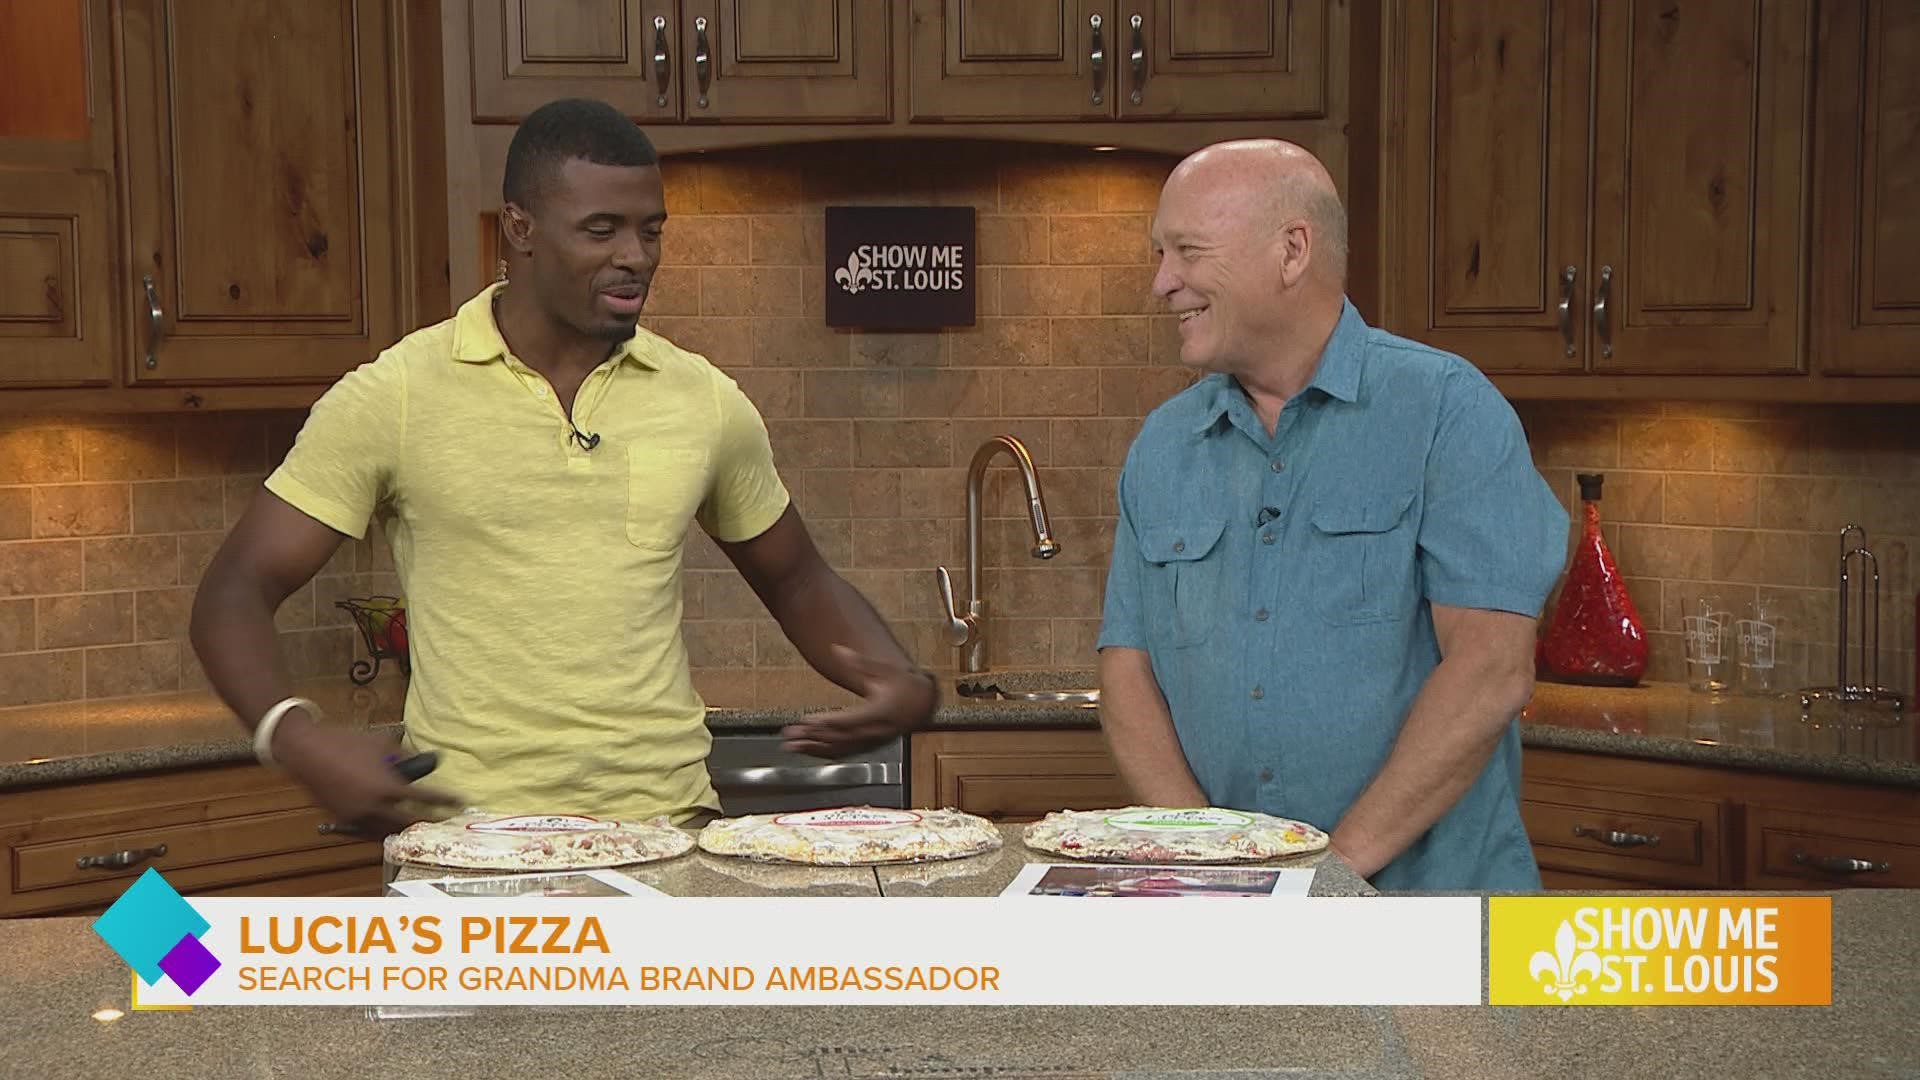 The owner of Lucia's Pizza, Steve Ashby, joins Malik in the Show Me Kitchen to discuss the Grandma Brand Ambassador search.